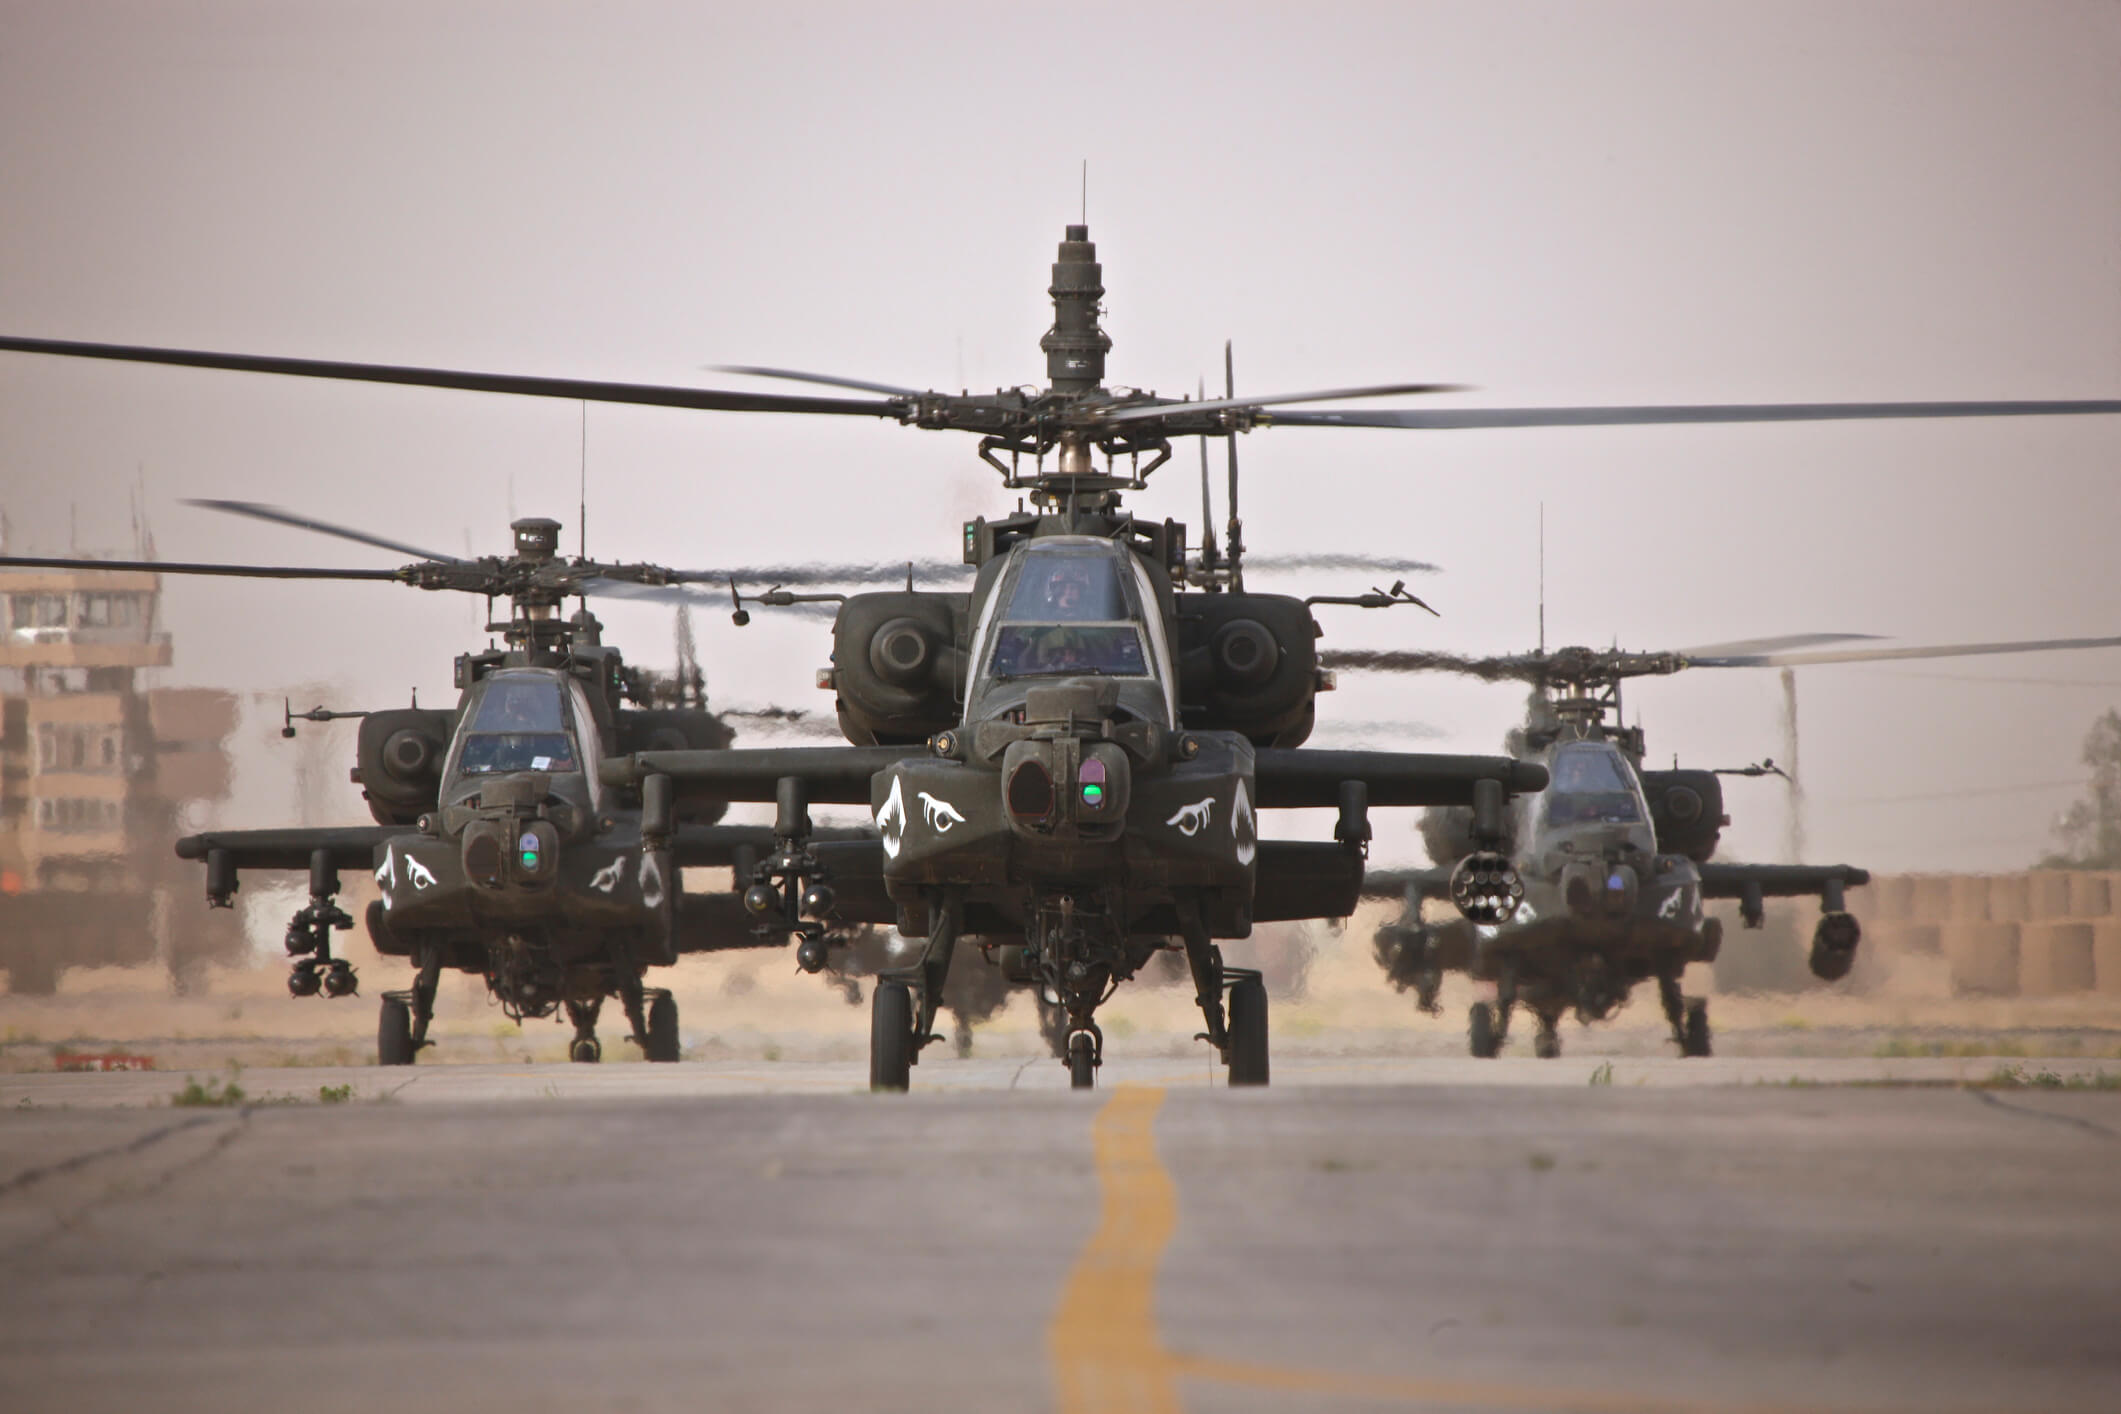 A Look at the Top Iraq War Helicopters - A group of AH-64D Apache helicopters on the runway at COB Speicher.